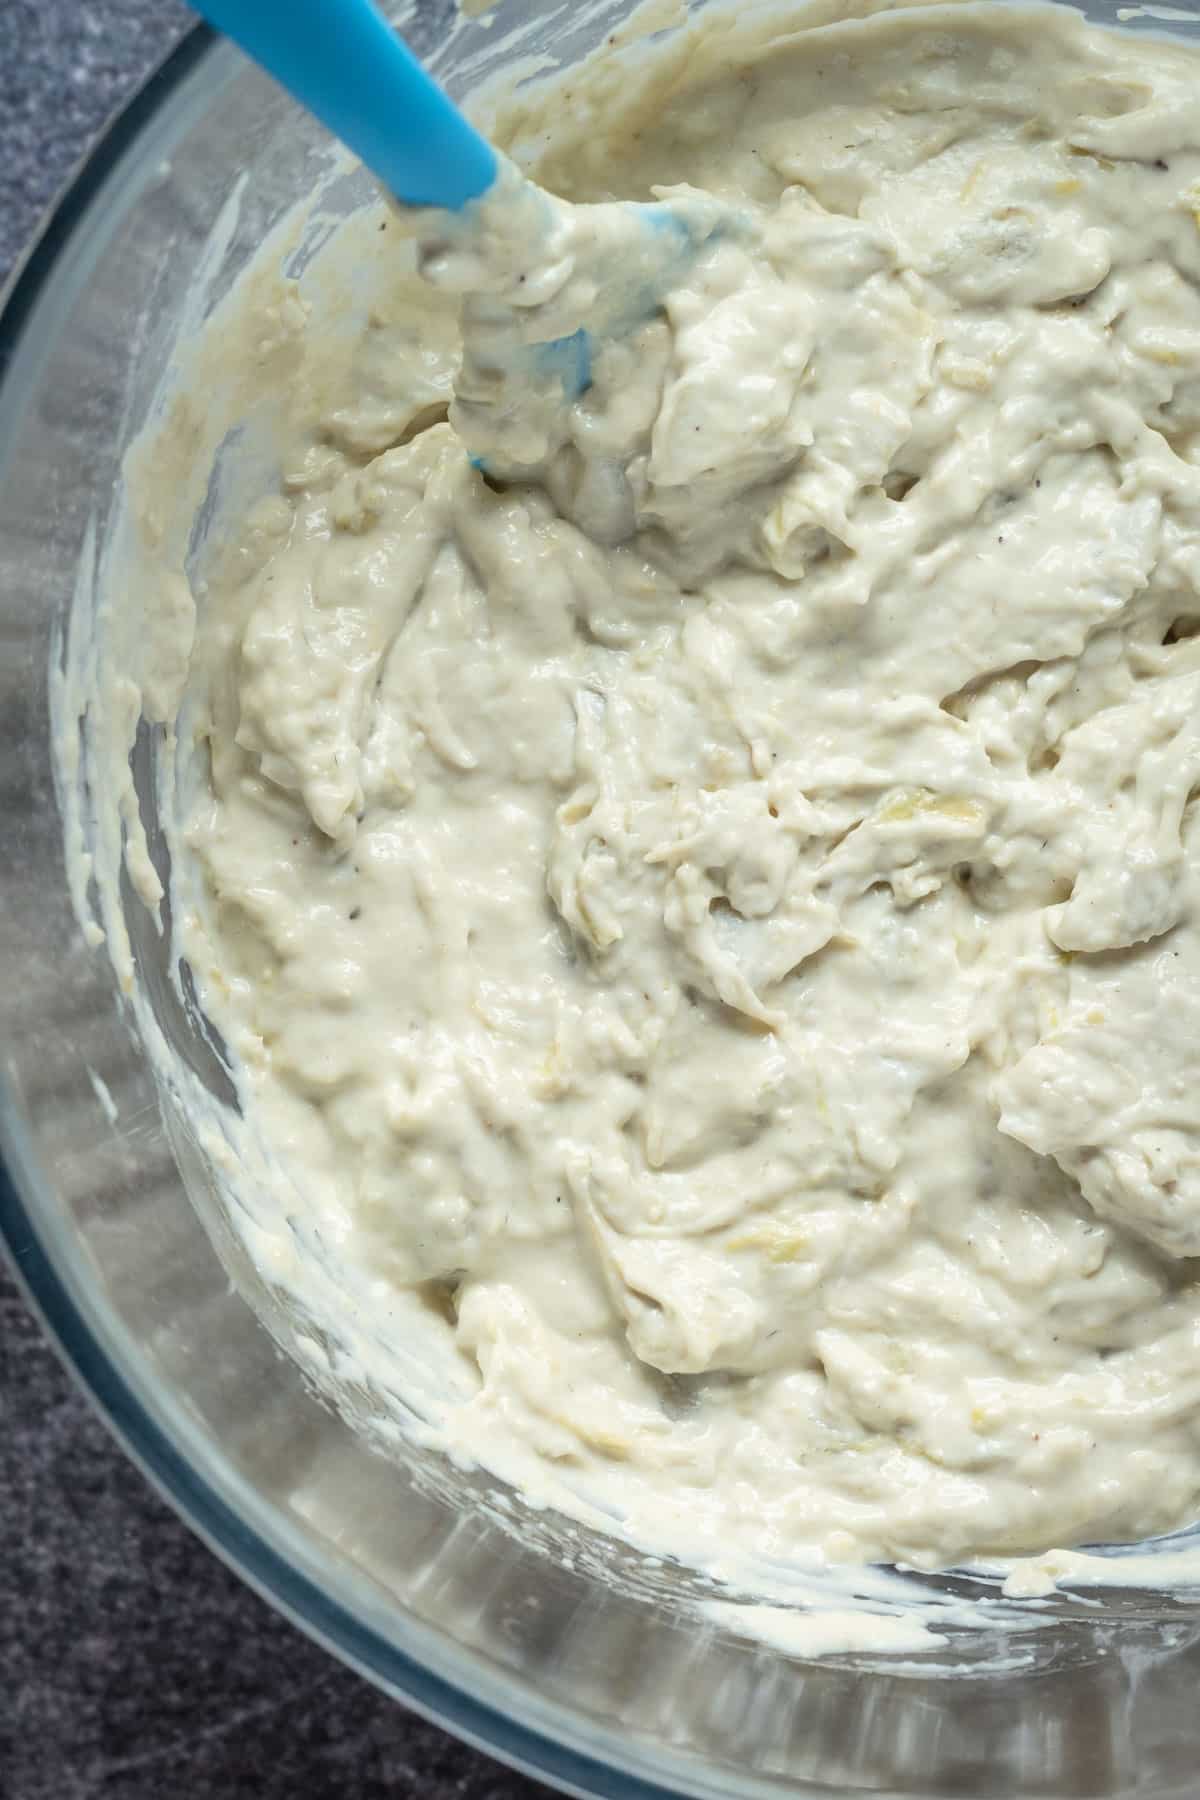 Creamy dip in a glass mixing bowl.